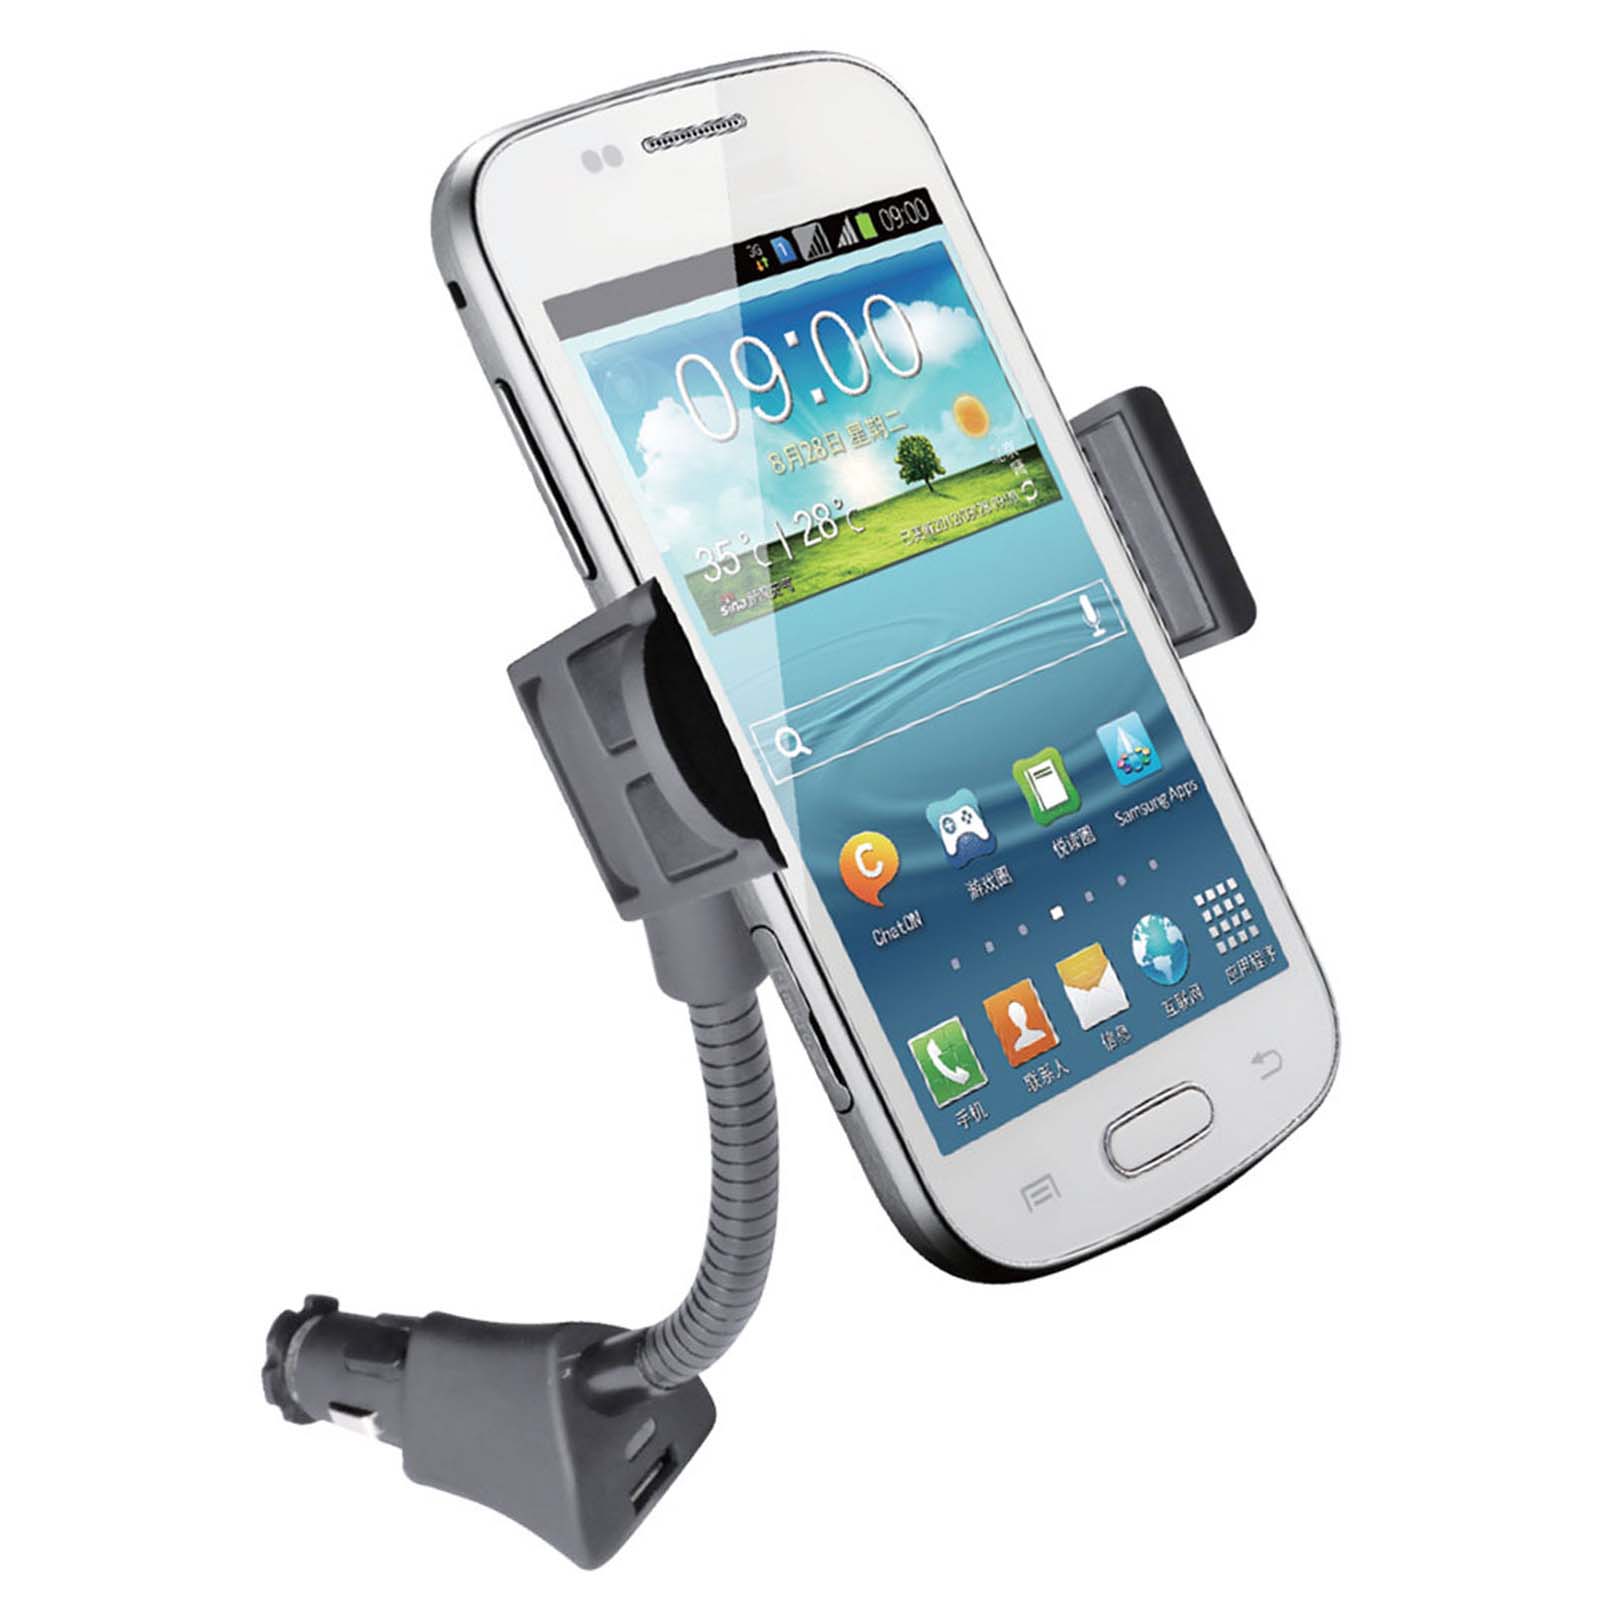 Tech junkie Universal Cell Phone Car Mount with USB Charger - Black